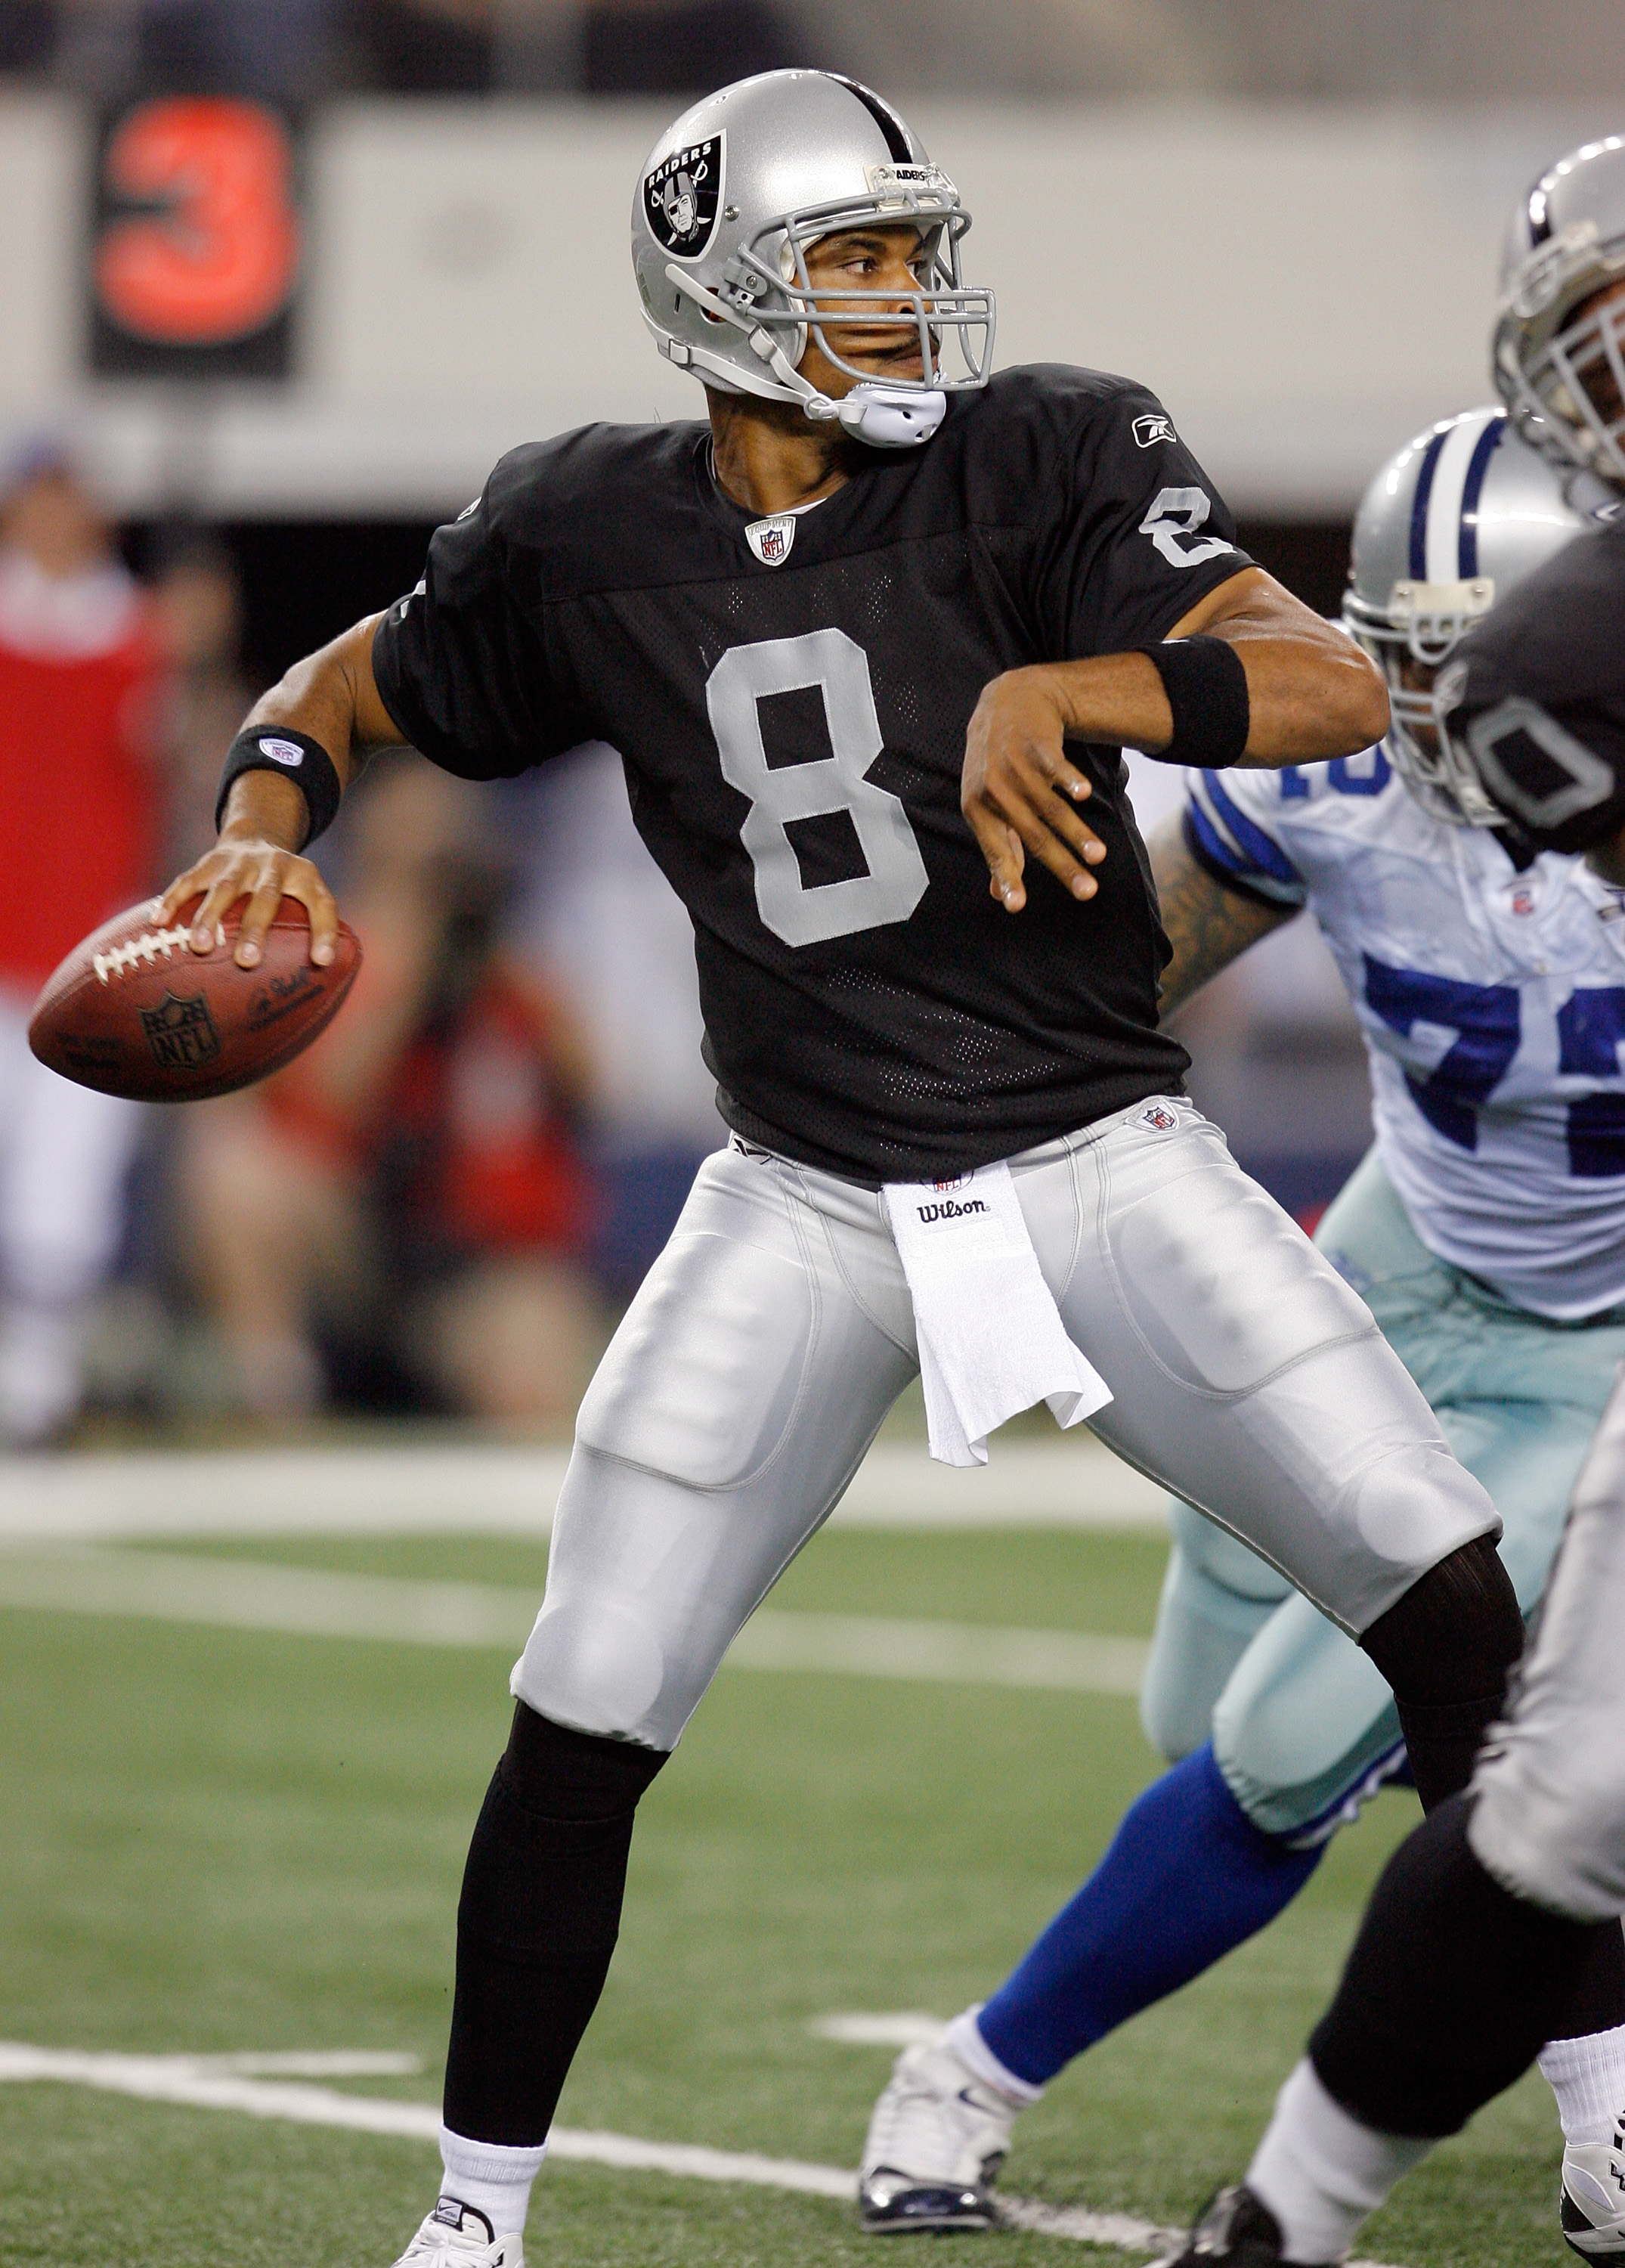 ARLINGTON, TX - AUGUST 12: Jason Campbell #8 of the Oakland Raiders looks to pass in the preseason game againsts the Dallas Cowboys at the Dallas Cowboys Stadium on August 12, 2010 in Arlington, Texas. (Photo by Tom Pennington/Getty Images)